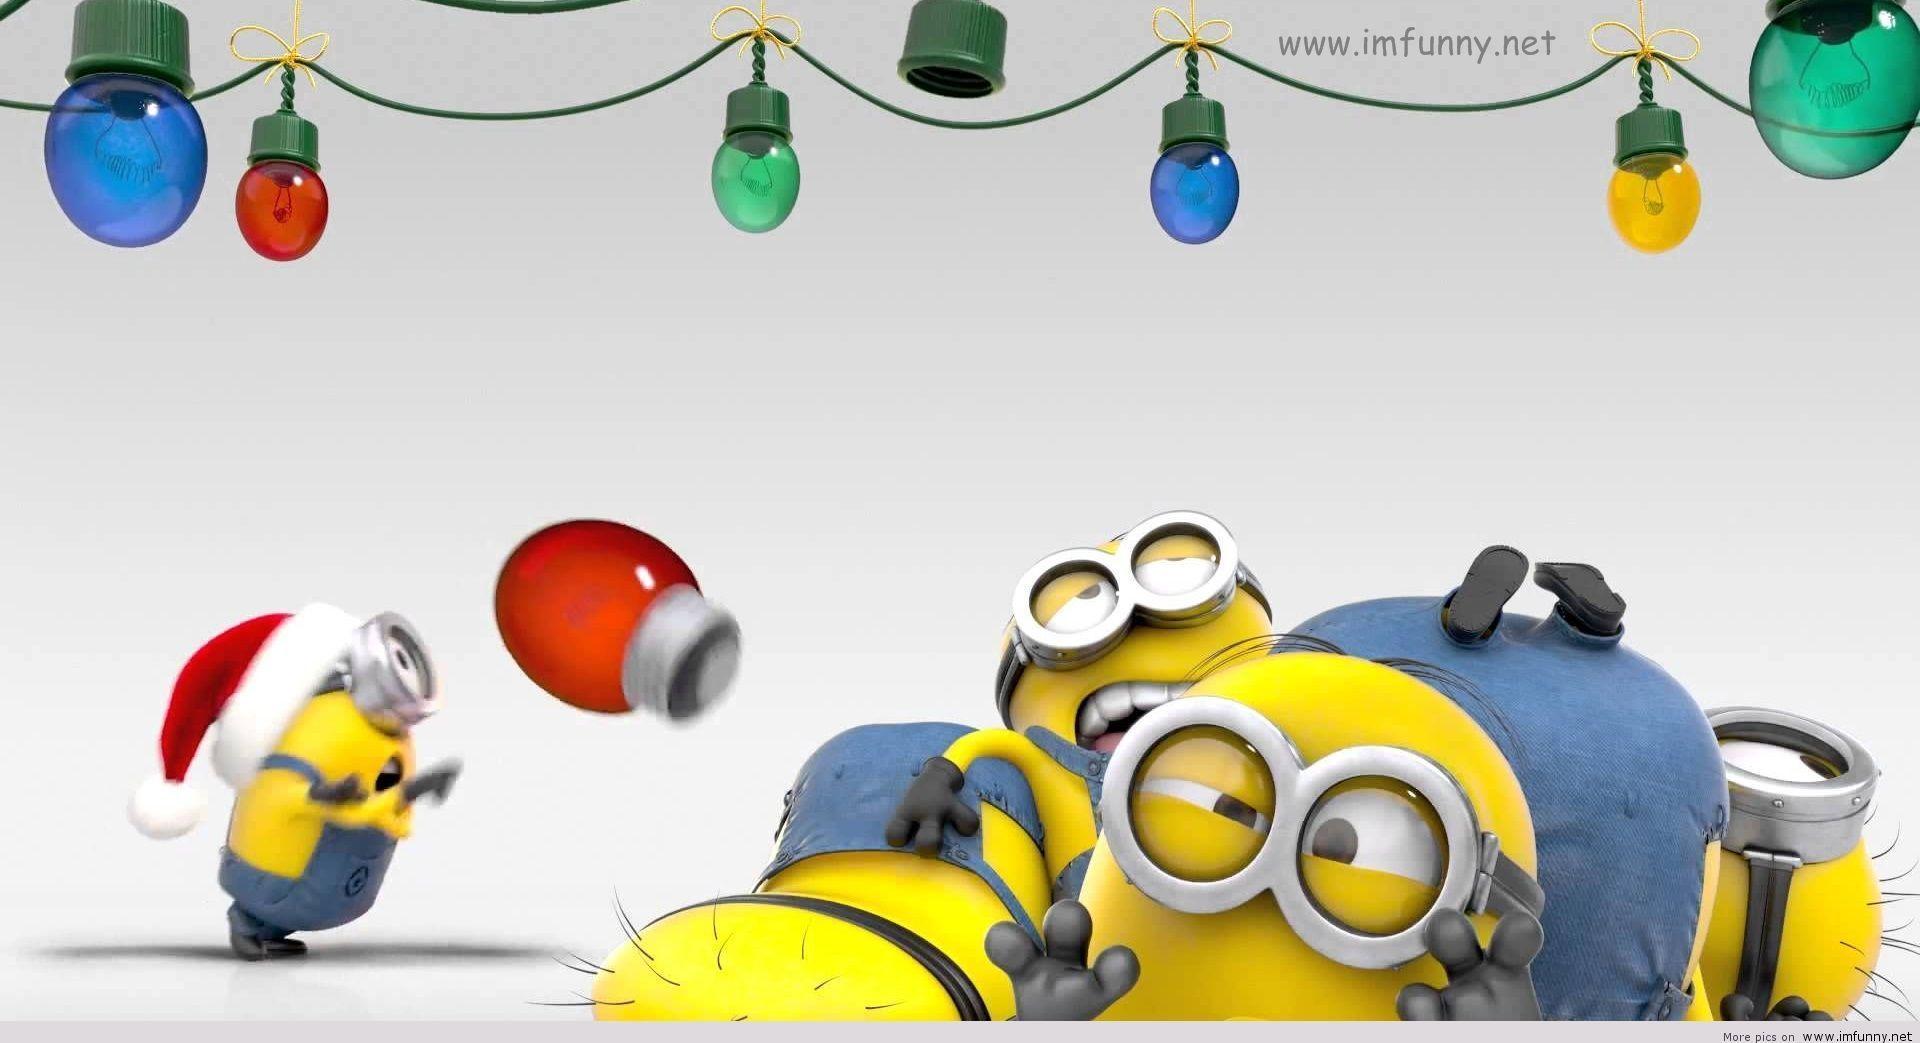 56 Funny Christmas Wallpapers Backgrounds For FREE | vlr.eng.br